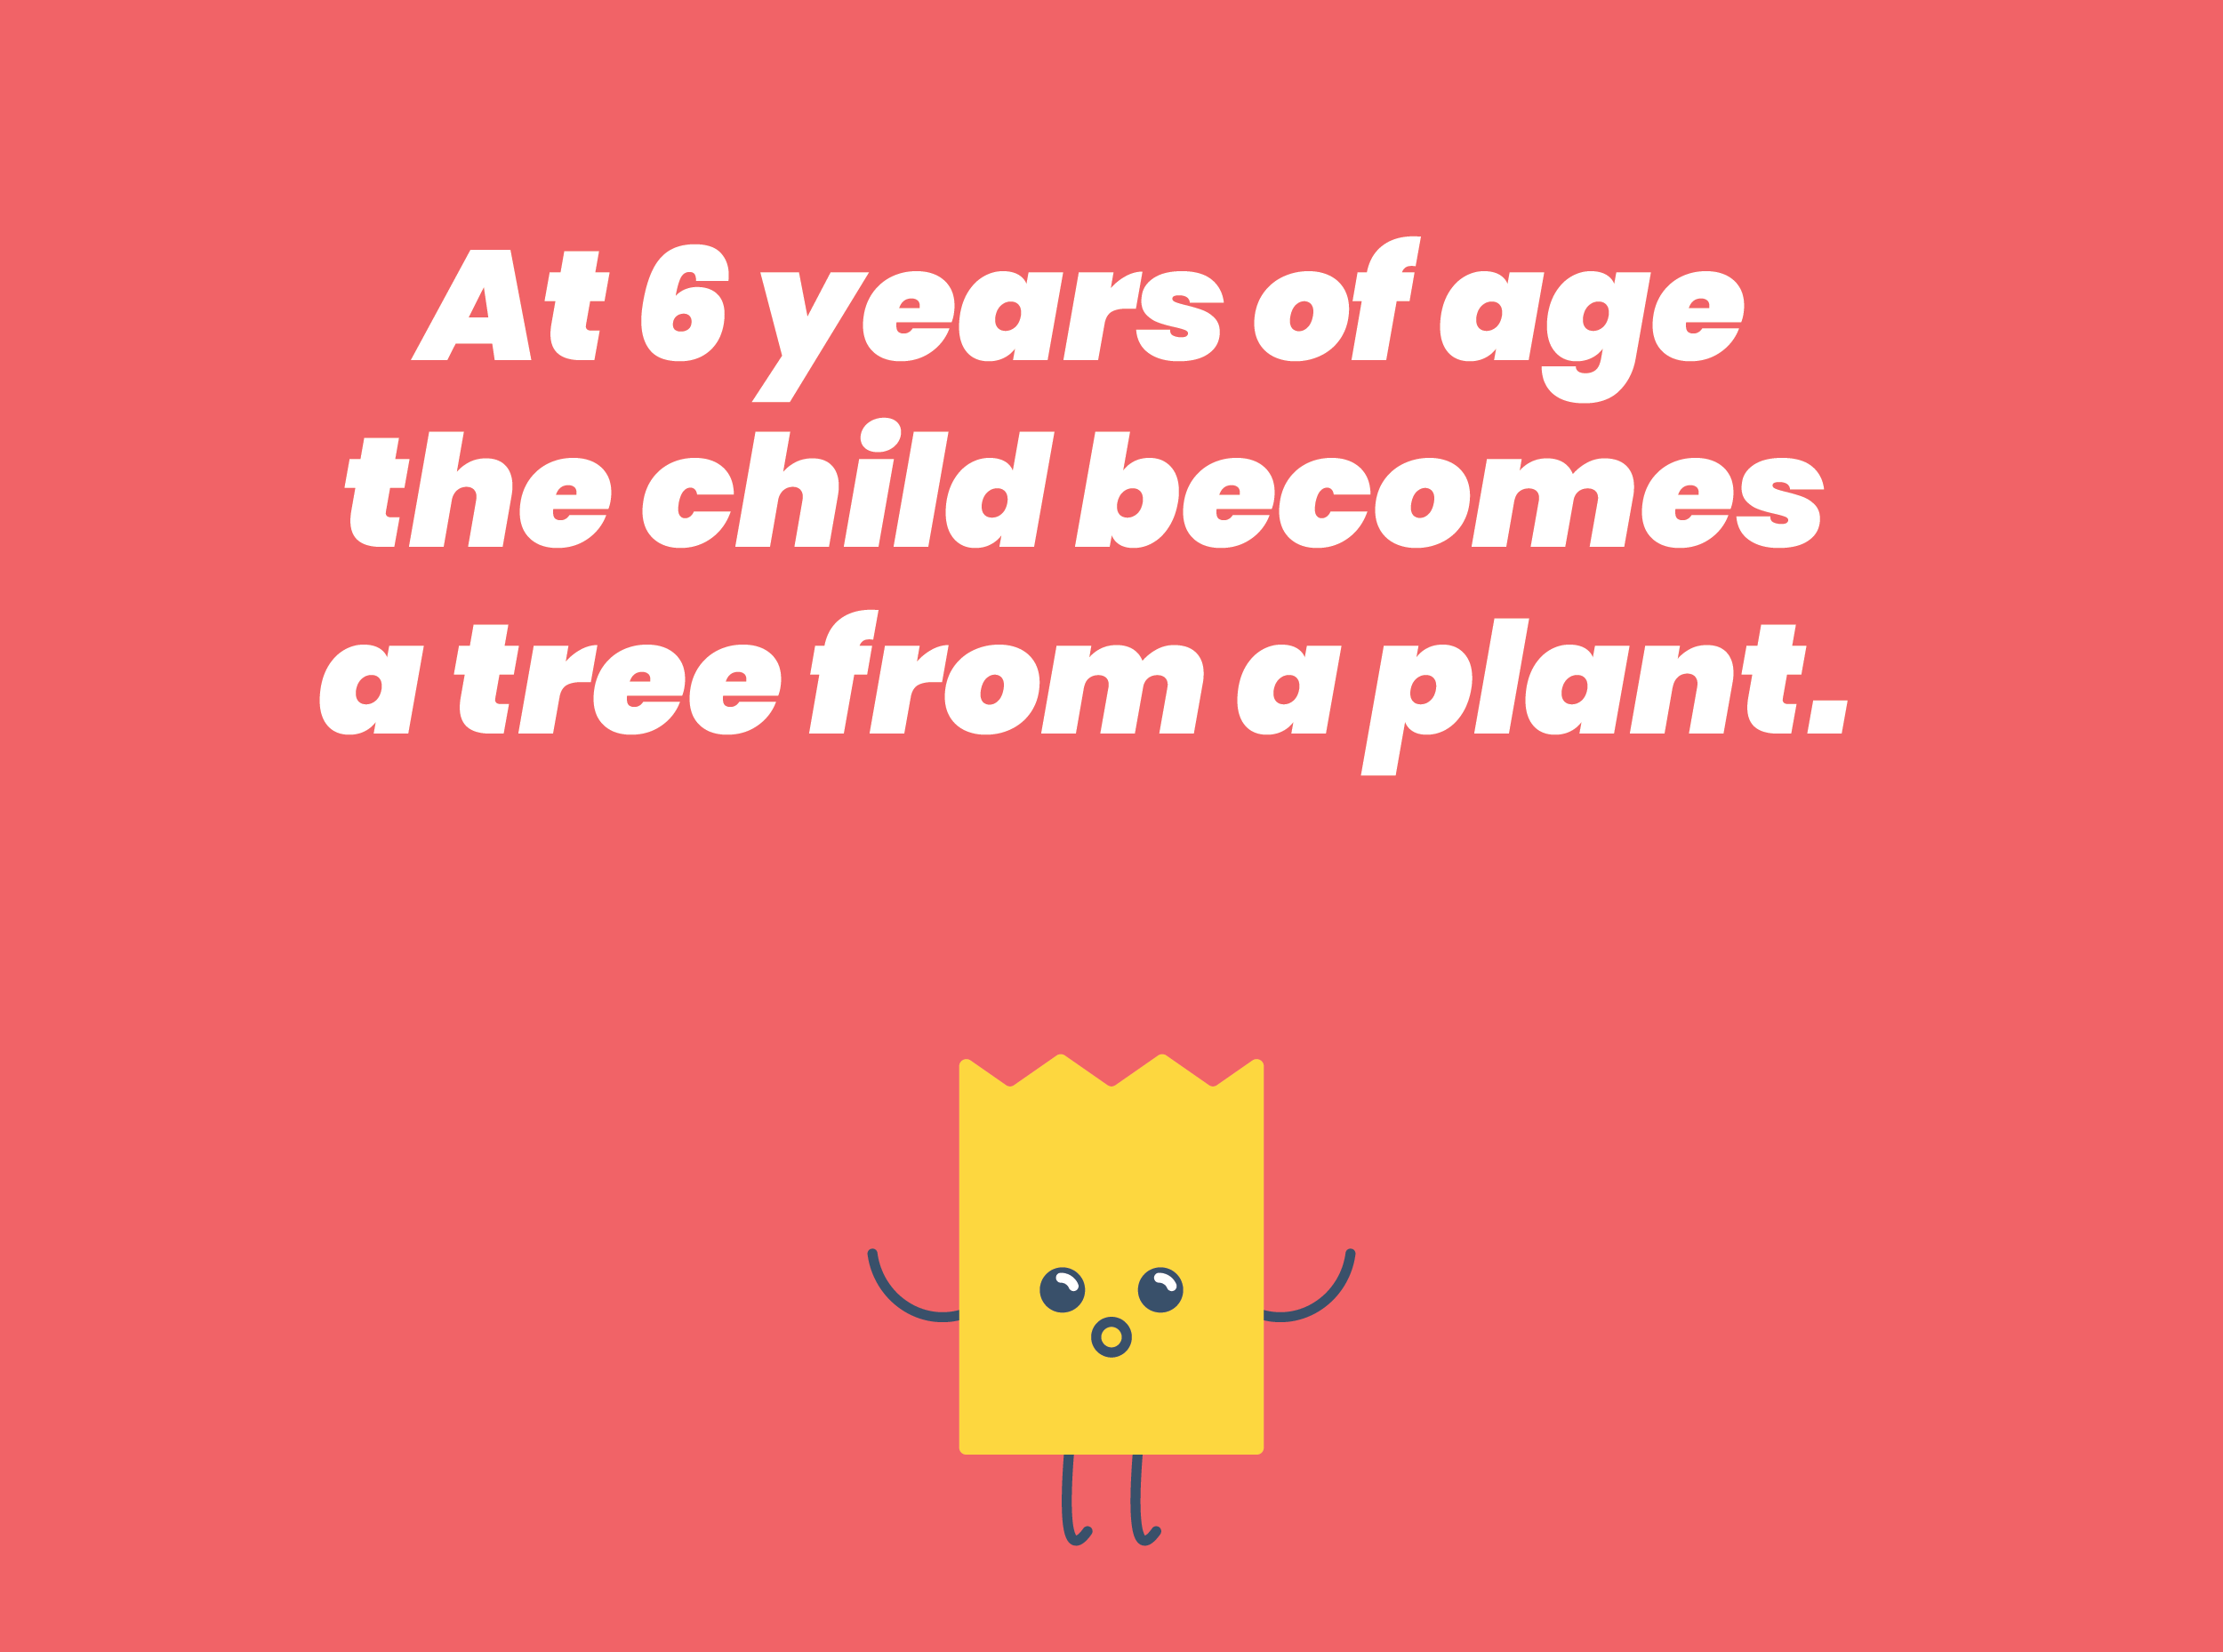 At 6 years of age the child becomes a tree from a plant.